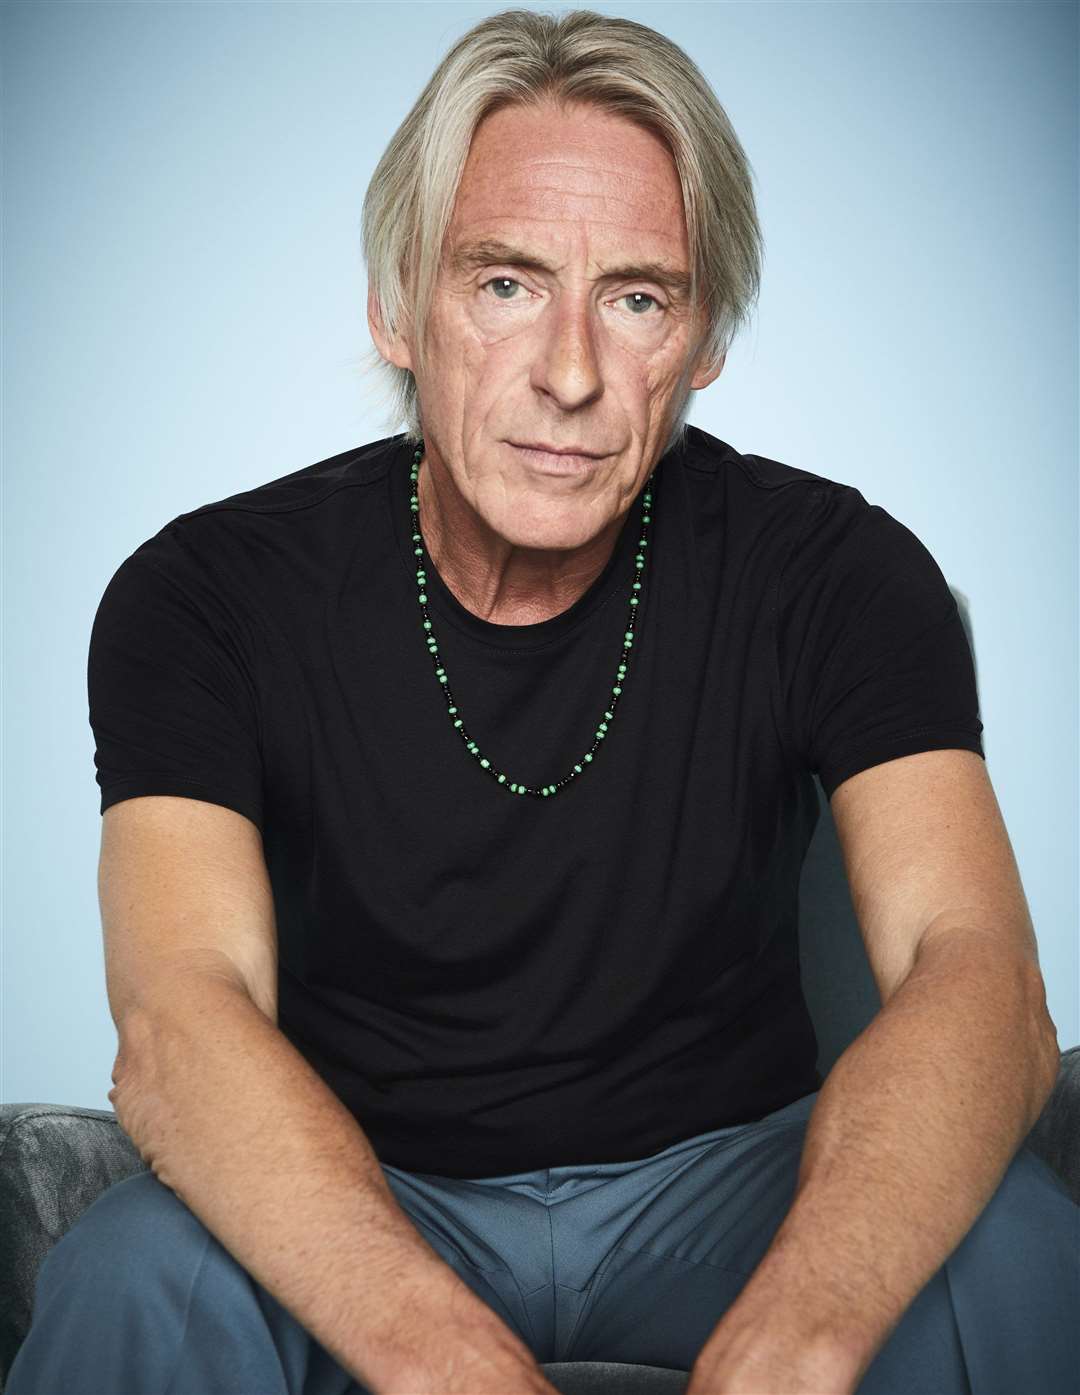 Paul Weller will be at Bedgebury Pinetum, Goudhurst for Forest Live